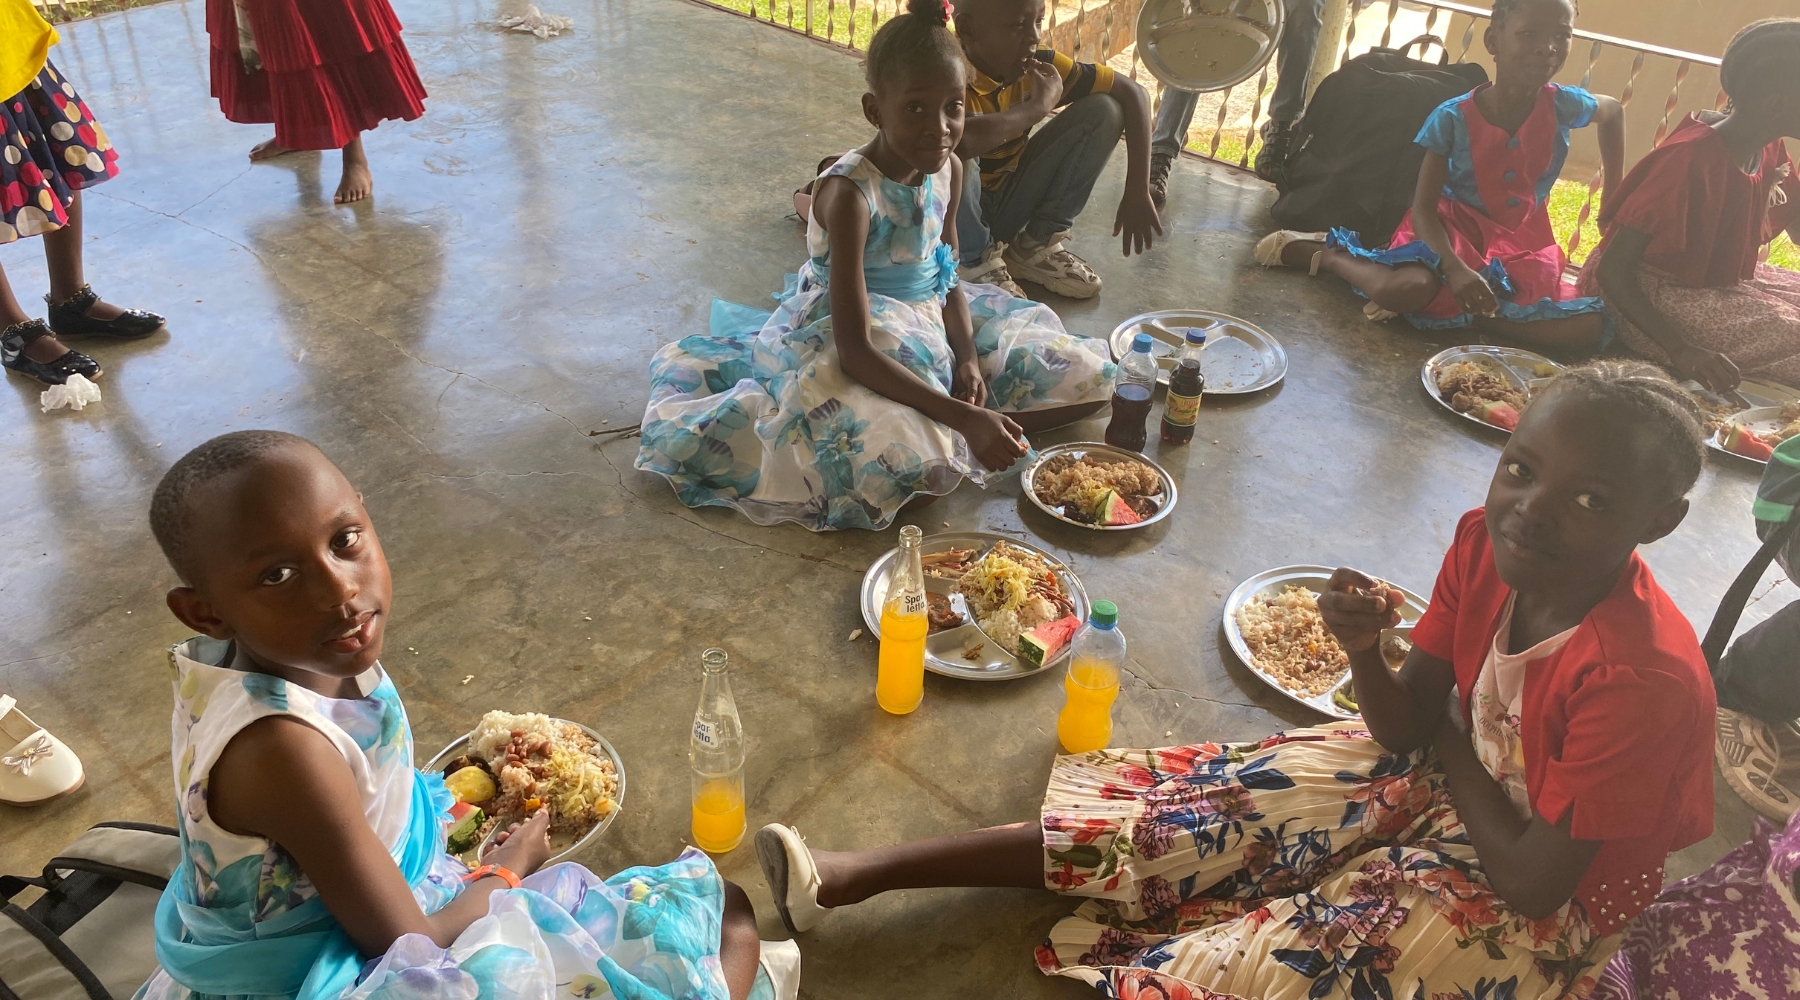 Children sitting on the ground eating a meal and drinking orange soda. 